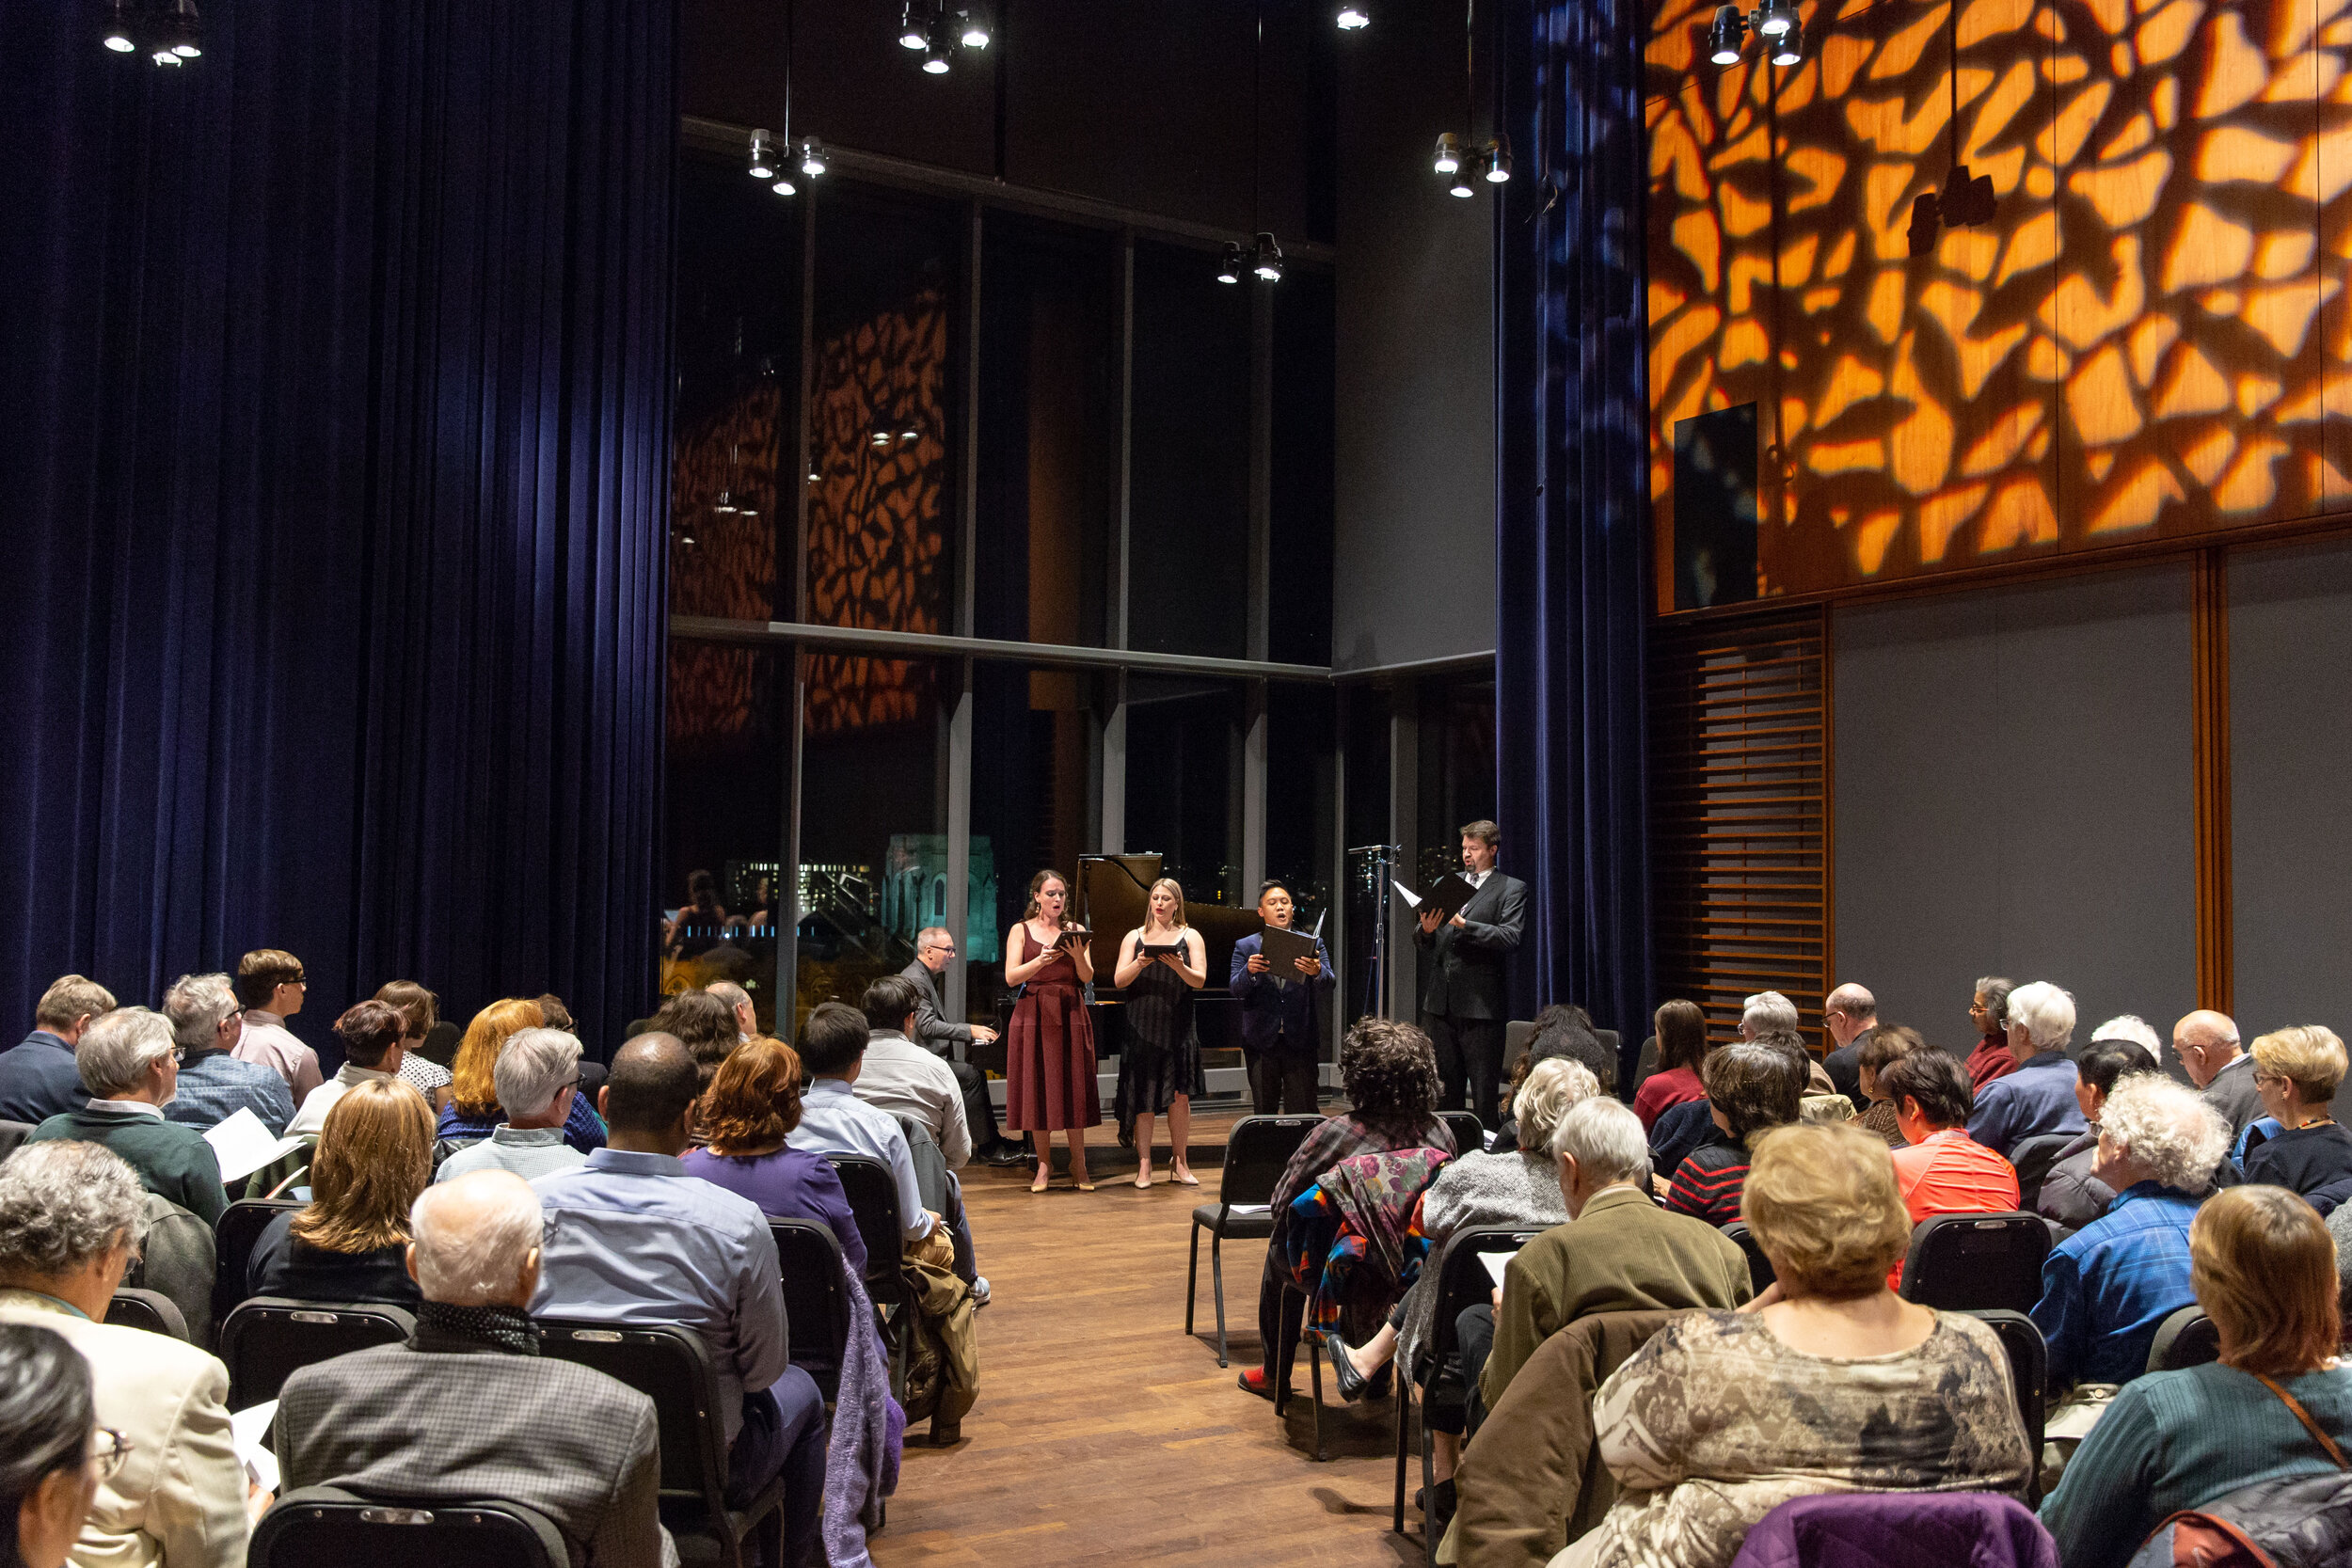  October: Fourth Coast Ensemble sings to a packed room at the Logan Center.  